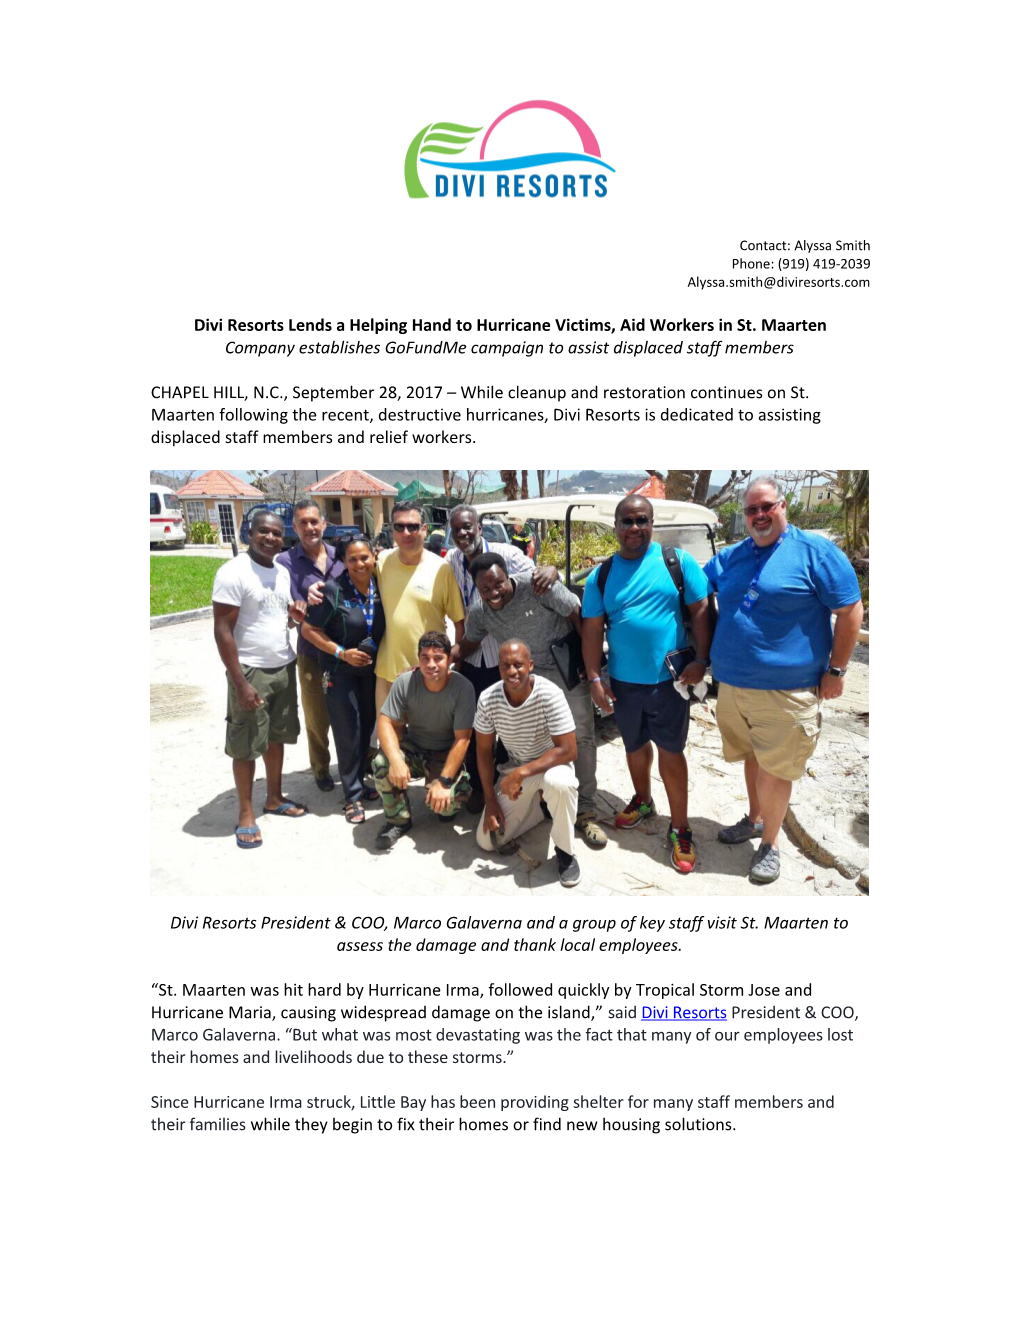 Divi Resorts Lends a Helping Hand to Hurricane Victims, Aid Workers in St. Maarten